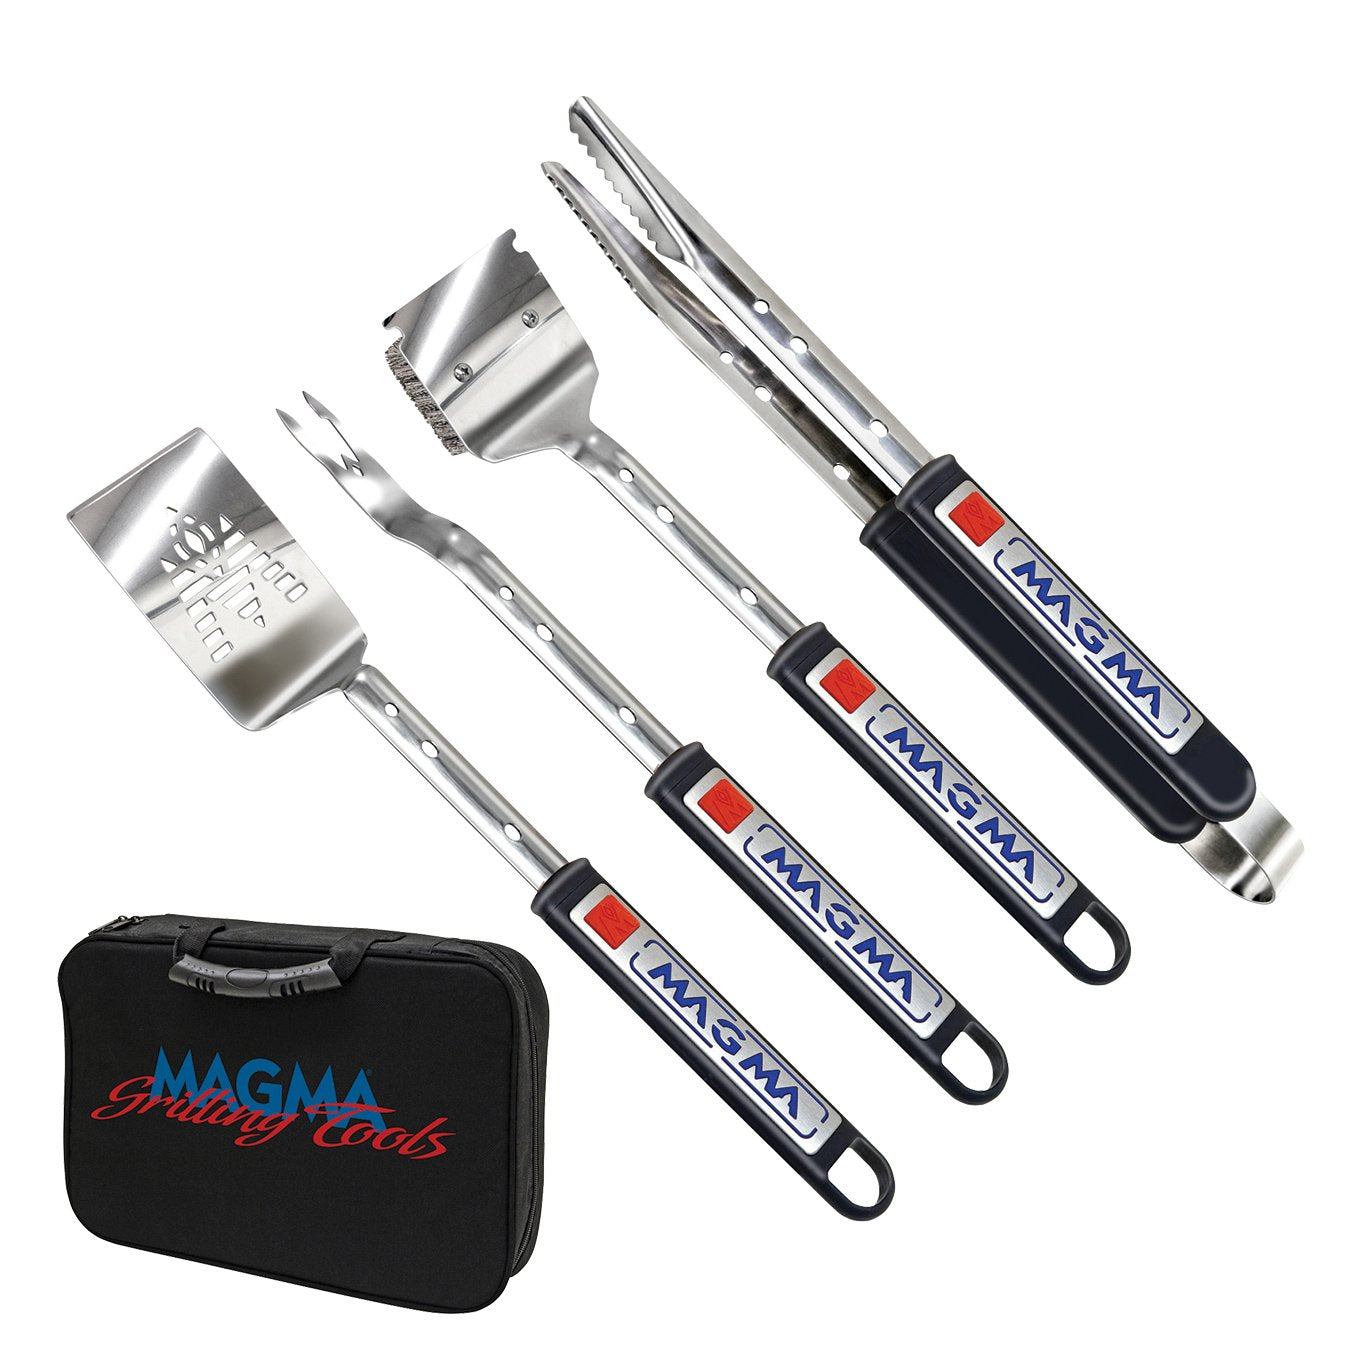 Meddele Torden Lamme Telescoping Grill Tools Set | Grill Kit | Magma – Magma Products